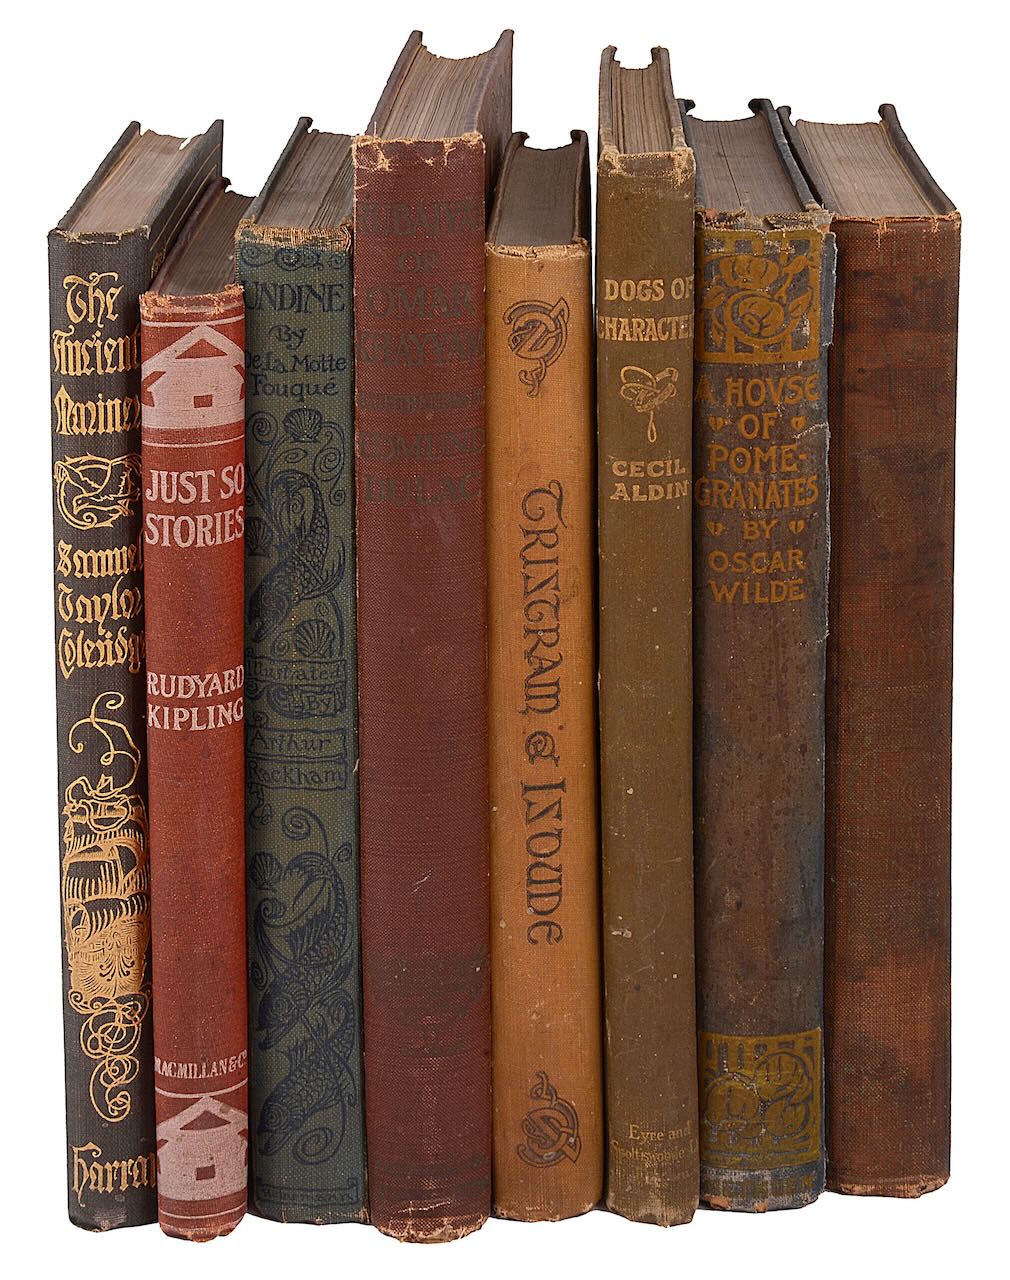 Illustrated Books. Various titles